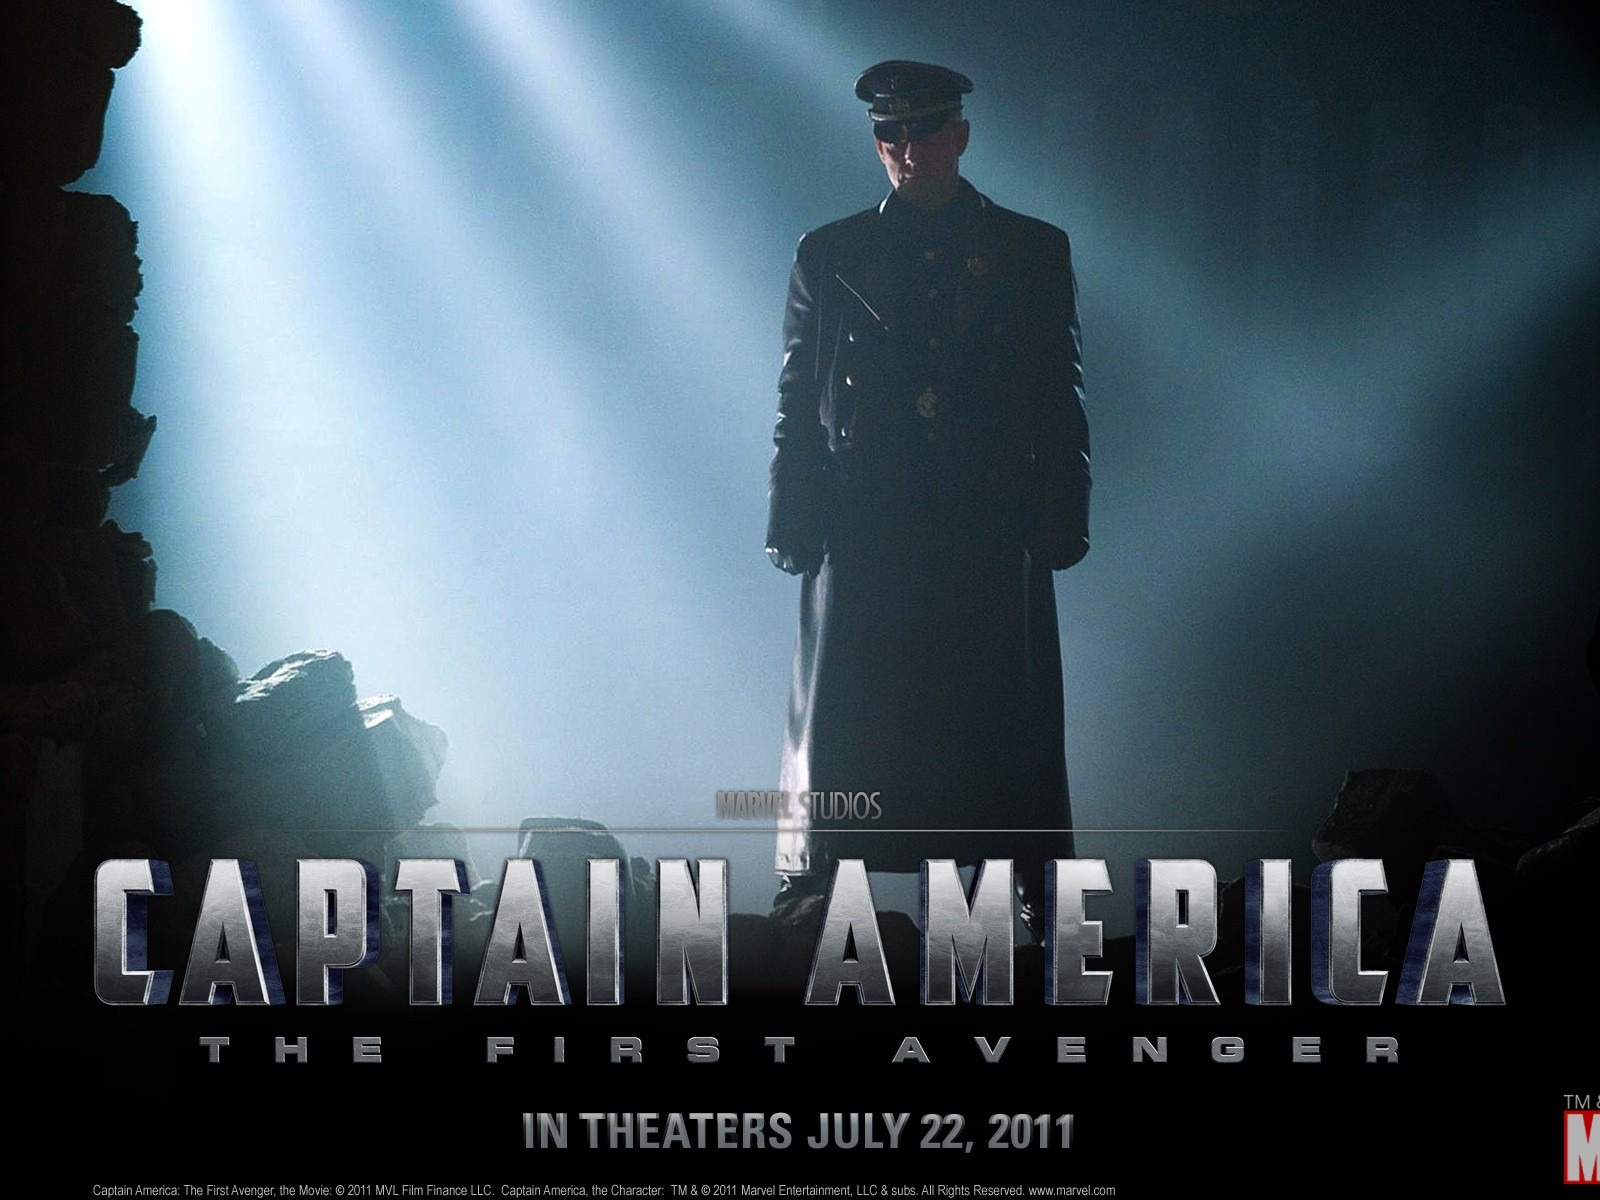 Captain America: The First Avenger wallpapers HD #19 - 1600x1200